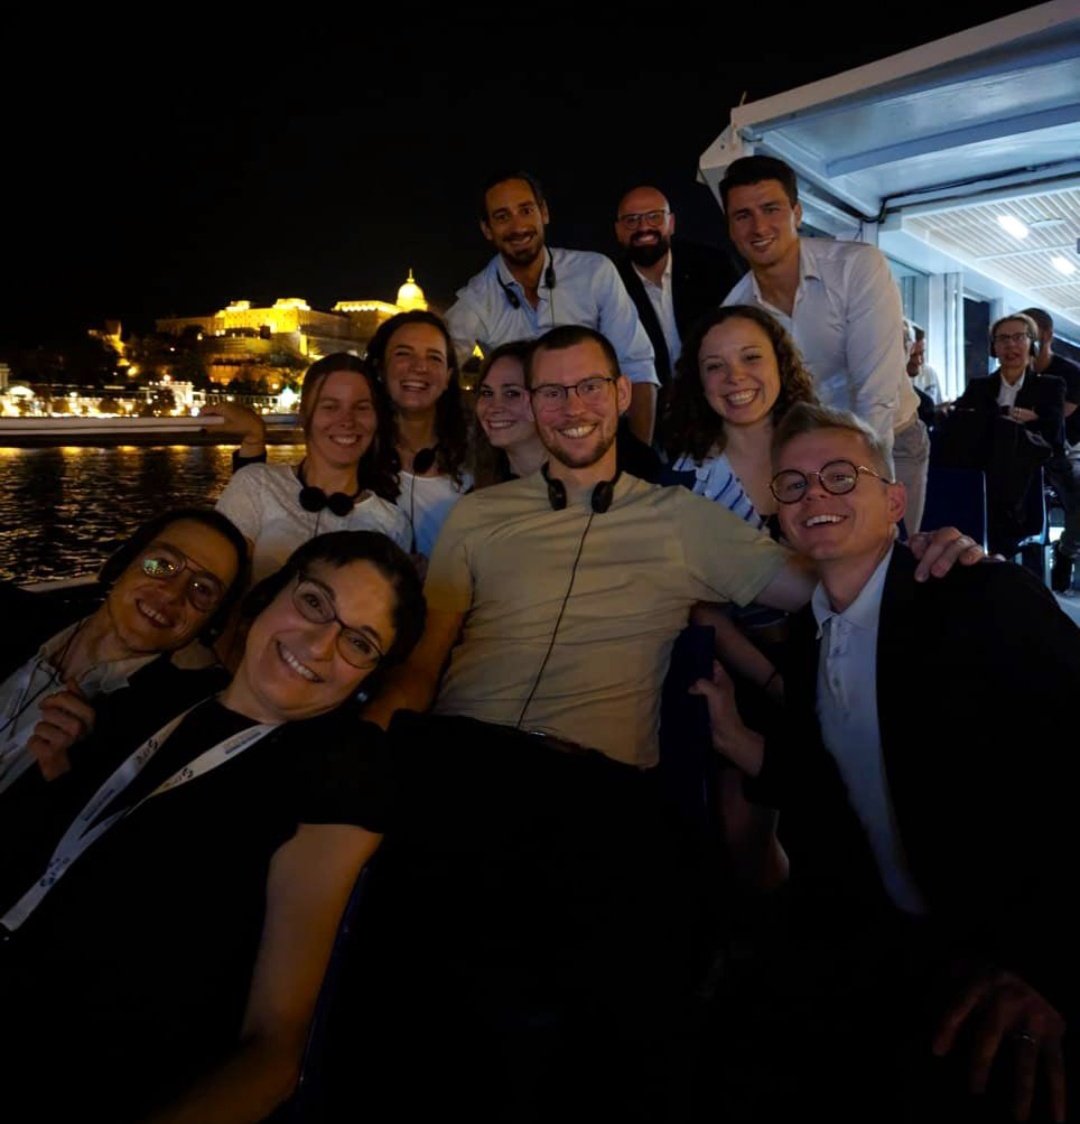 What a first day we had at #EFIC2023 , talking about #migraine in a workshop with such colleagues, @kerstin_luedtke , @JohannaRumenapp , and @_edinaszabo!
... and a great end with @CNAP_AAU colleagues on the Danubio to see the beatiful Budapest! @EFIC_org